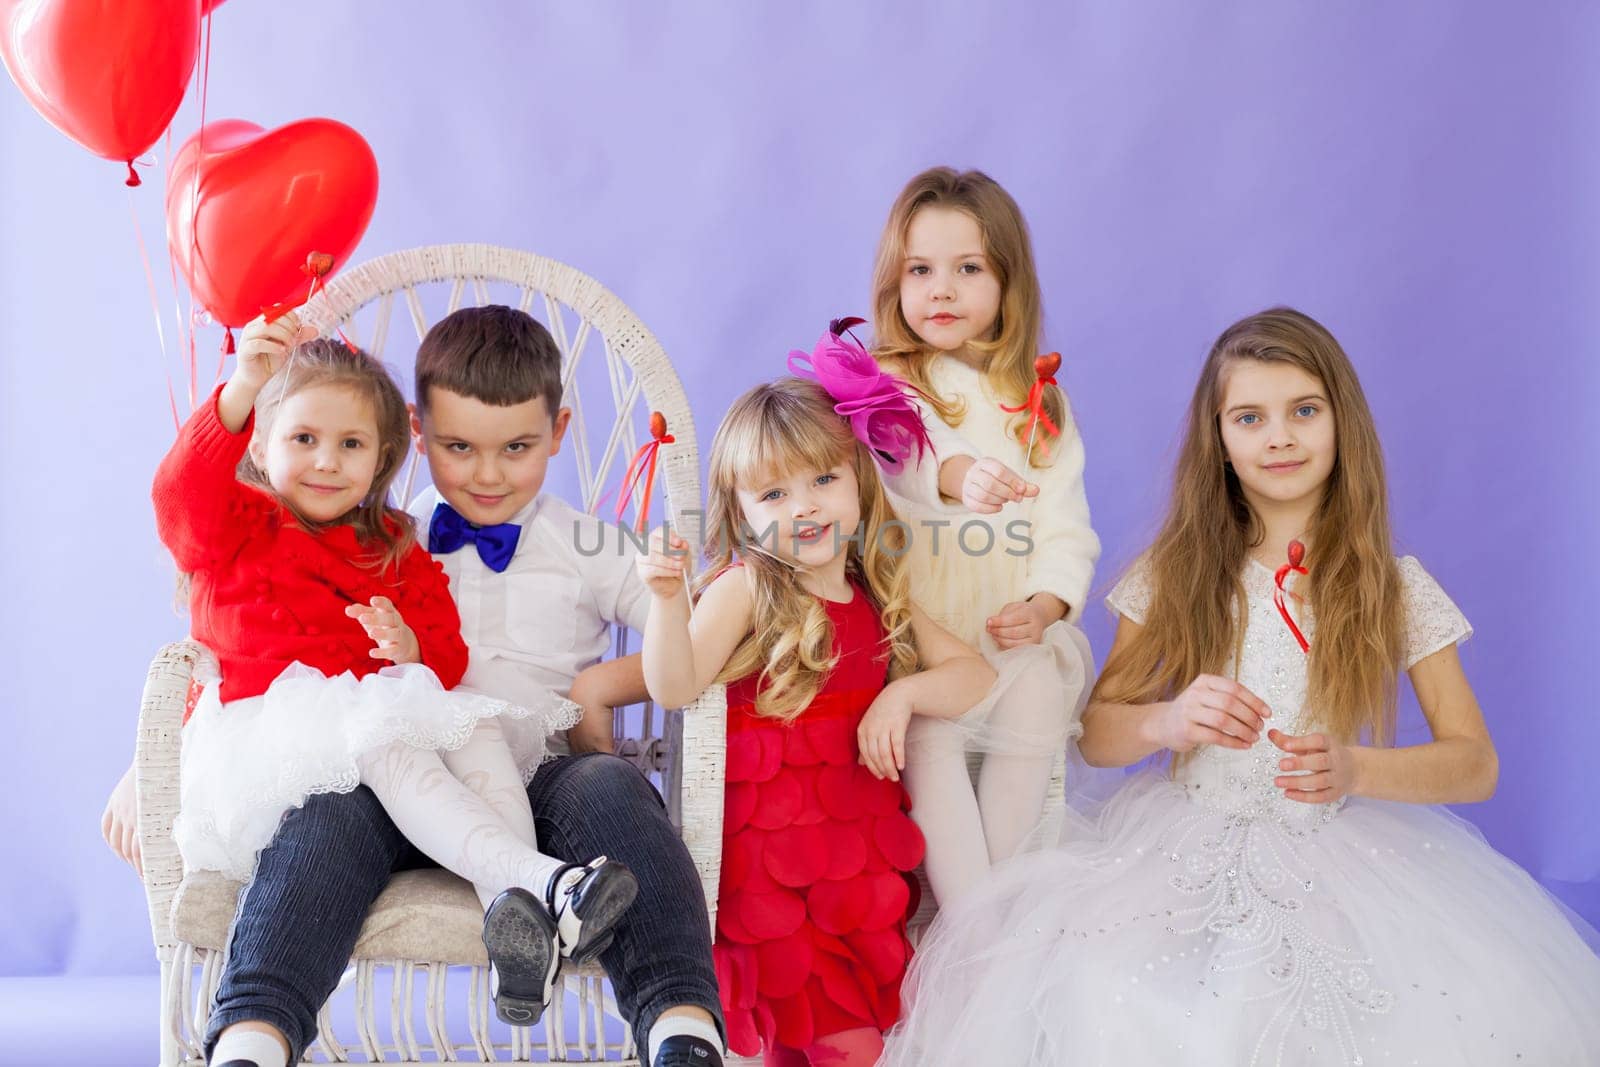 Boy and girls sit together with red balloons by Simakov